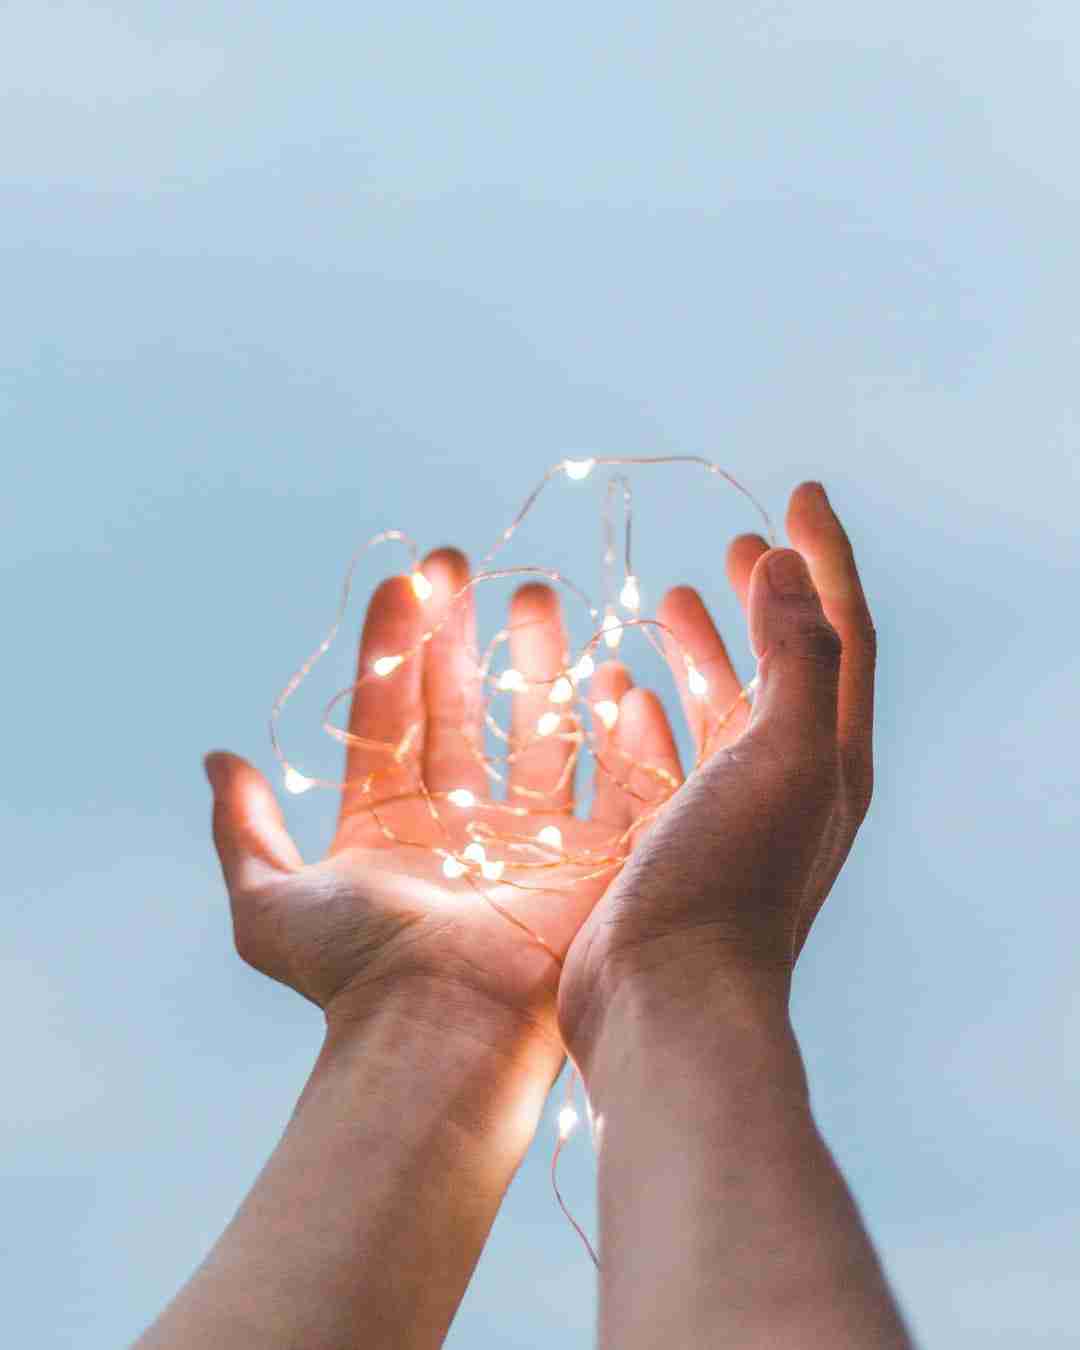 Hands holding a bunch of small illuminated lights indicating the healing energy of the hands